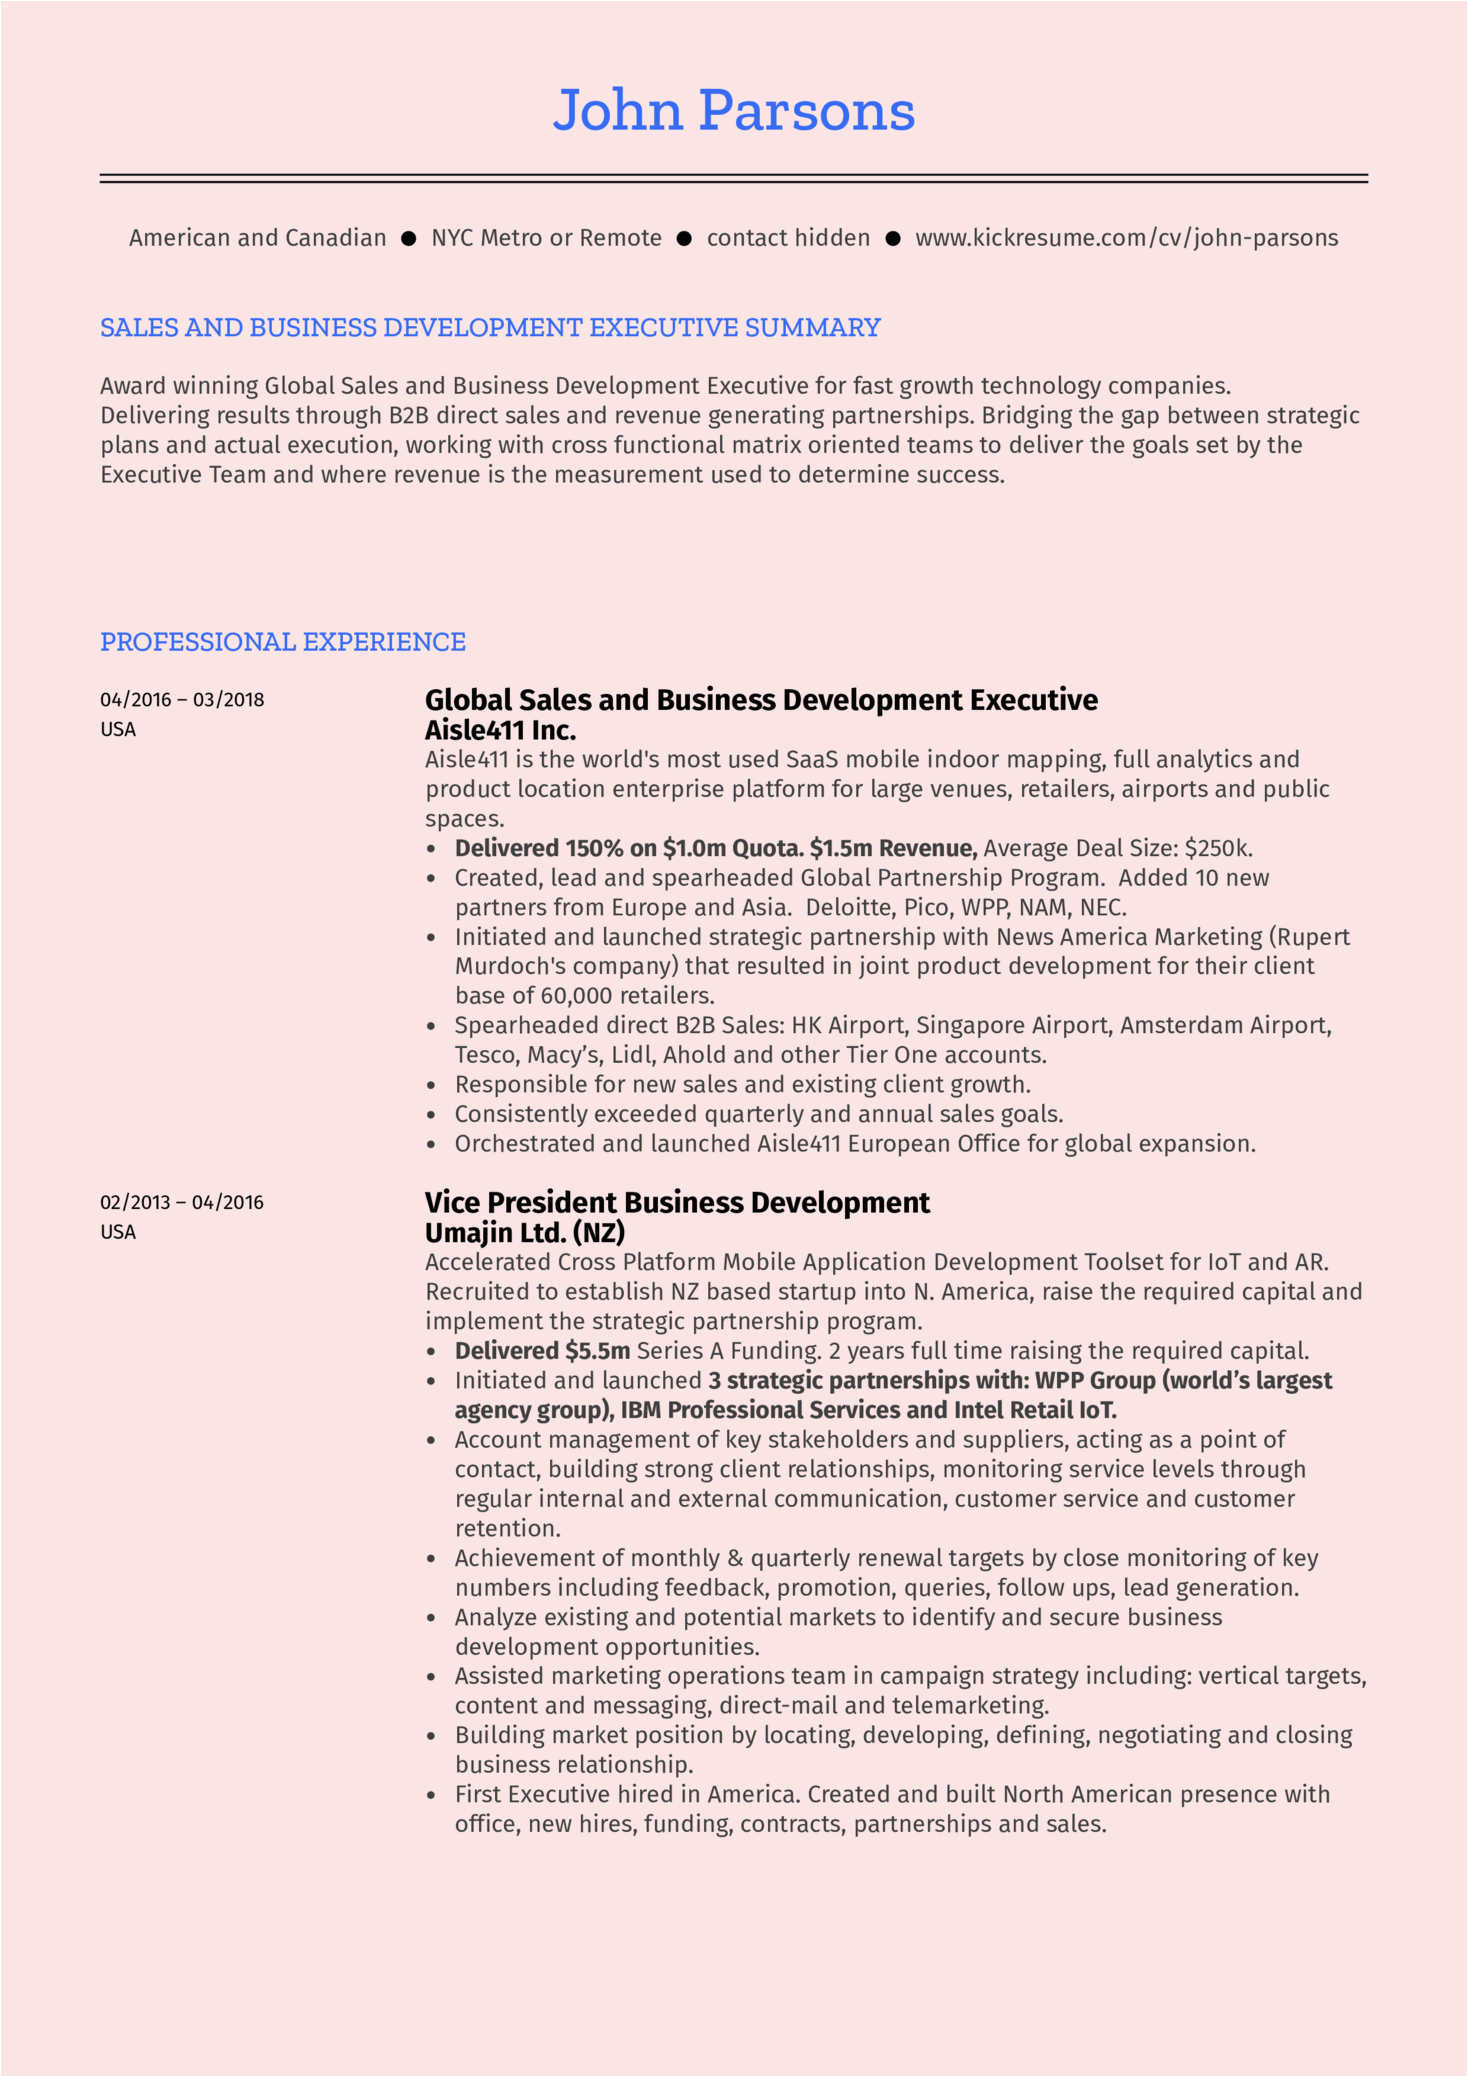 Sample Resume Fresh Graduate for Business Development Job Resume Examples by Real People Business Development Executive Resume